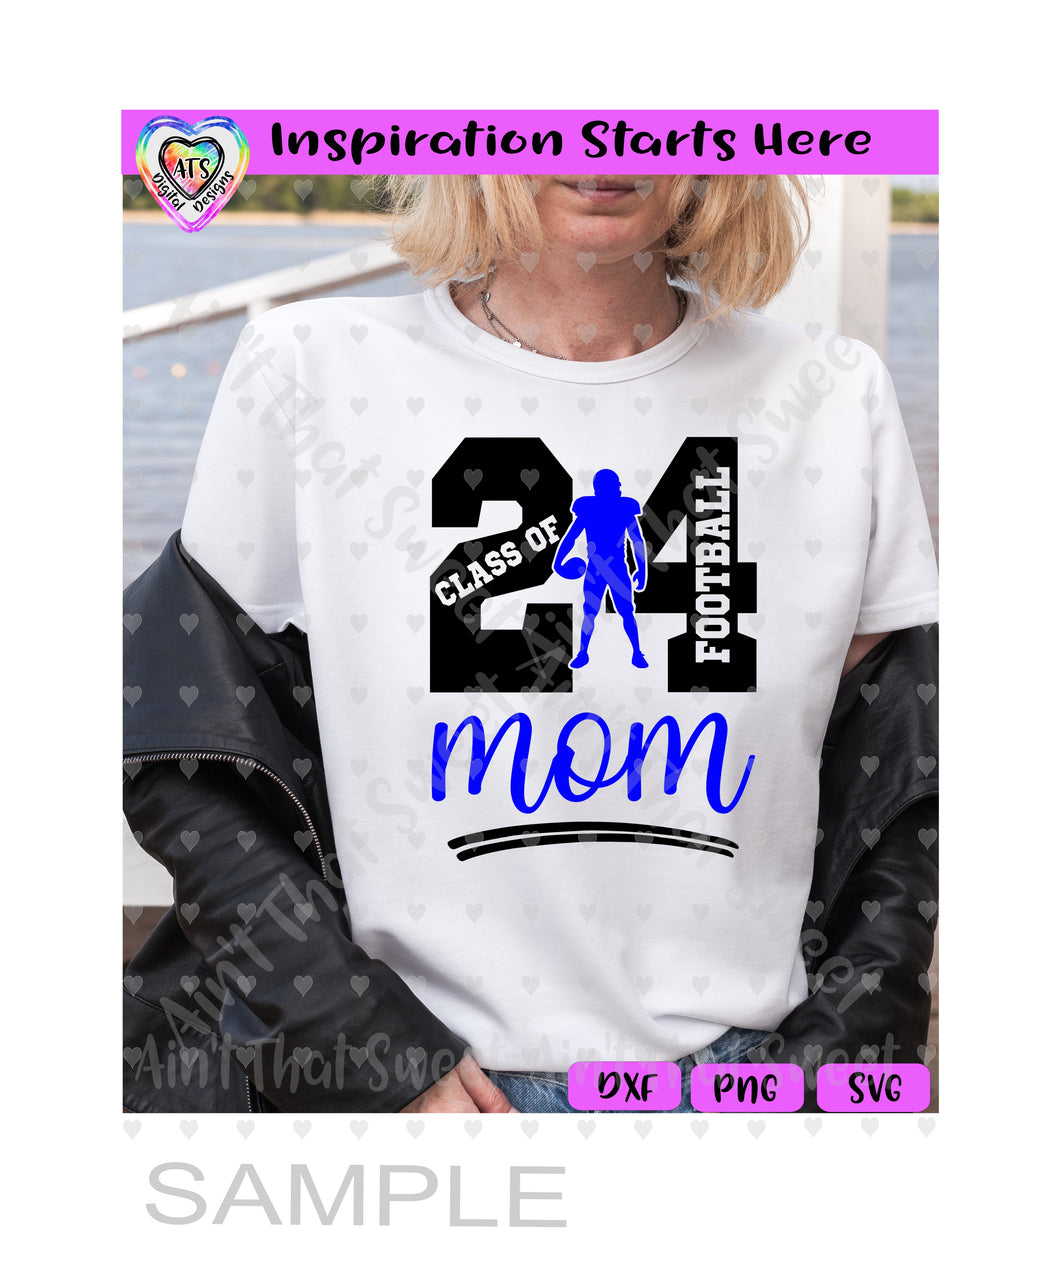 Class Of 24 | Football Player | Mom - Transparent PNG SVG DXF - Silhouette, Cricut, ScanNCut